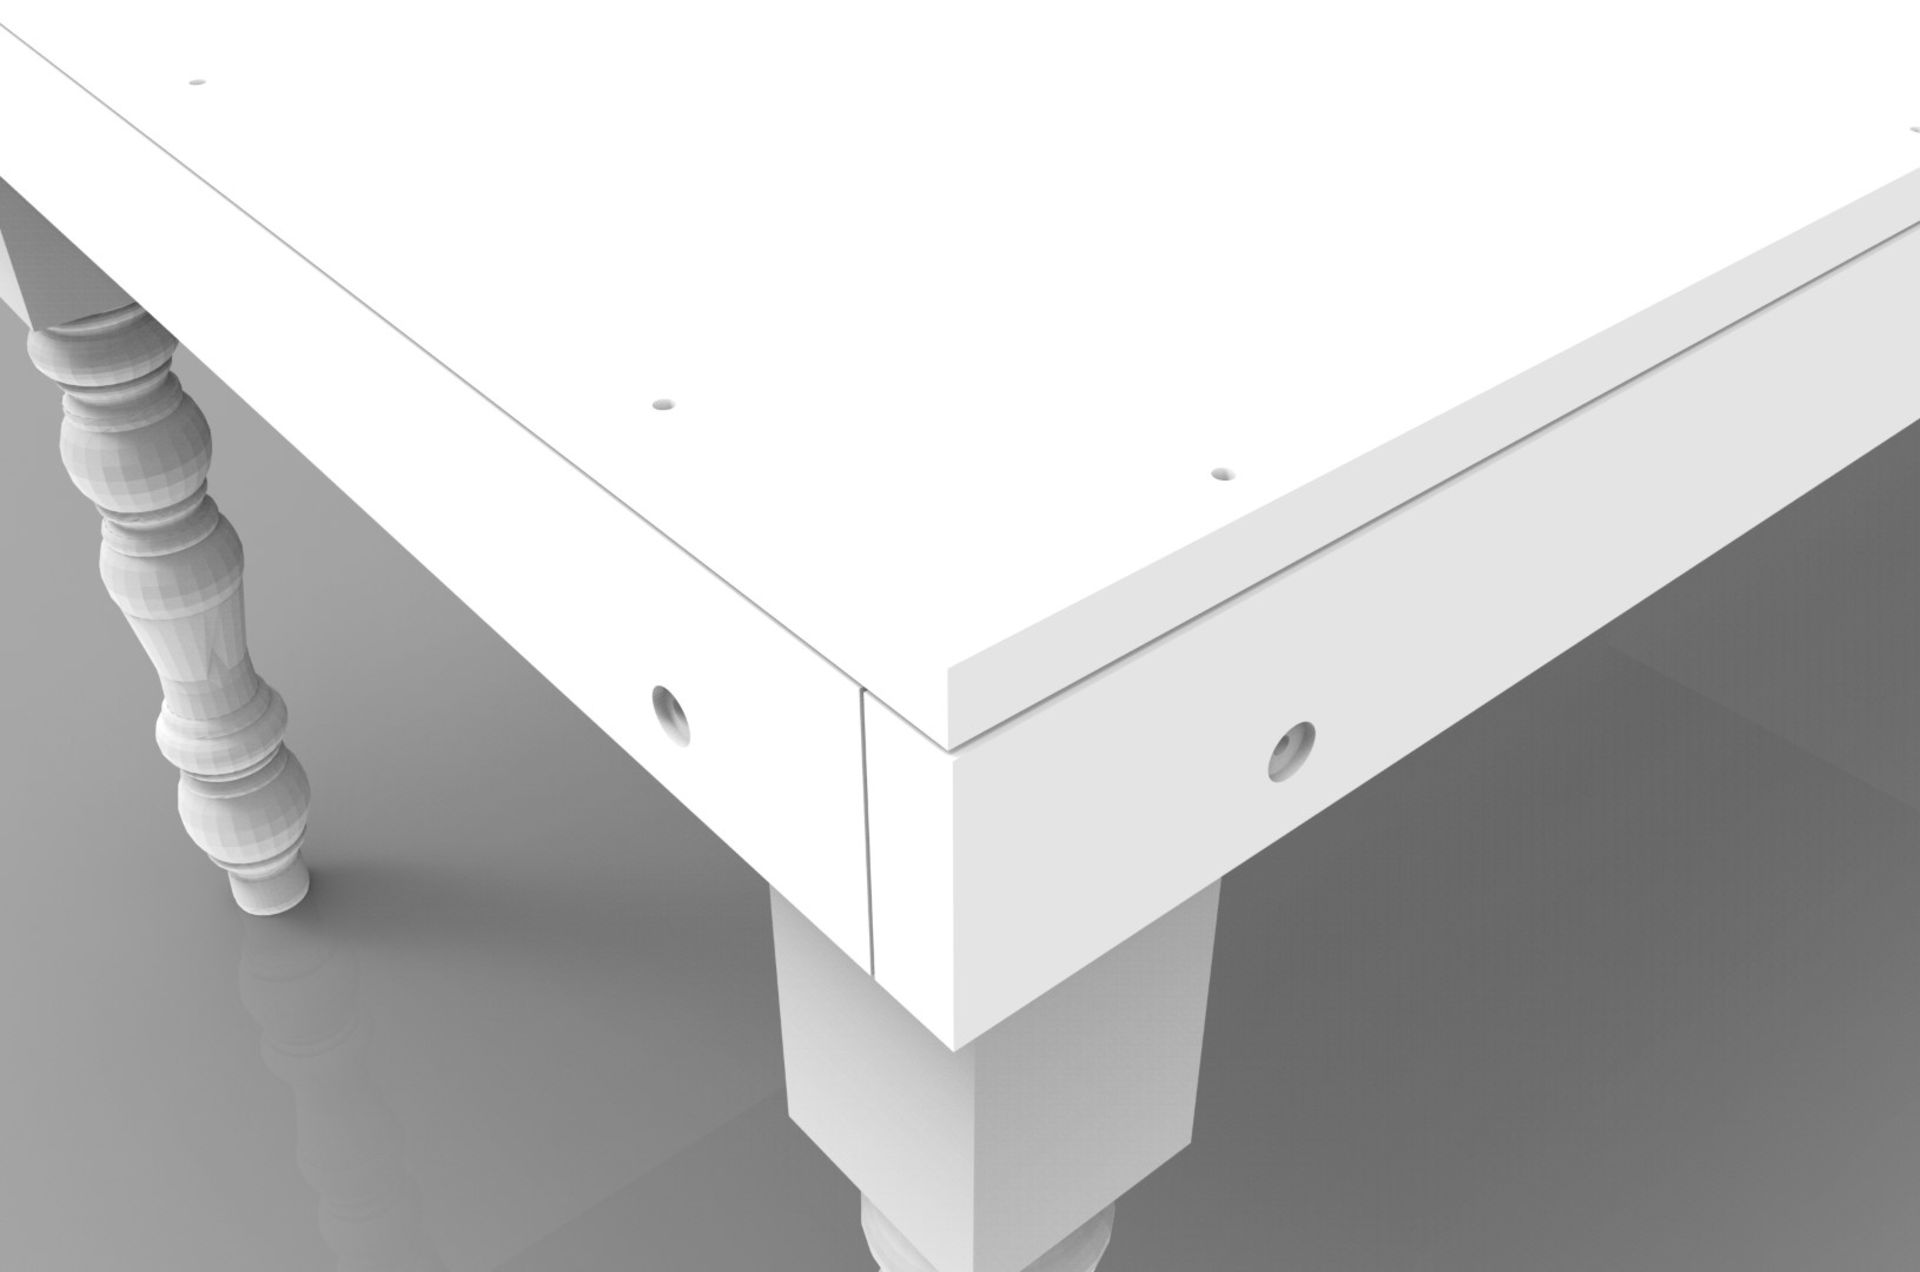 5 x Bespoke Rectangular Commercial Event / Dining Tables In White - Dimensions: 198cm x D99 x H74cm - Image 2 of 5